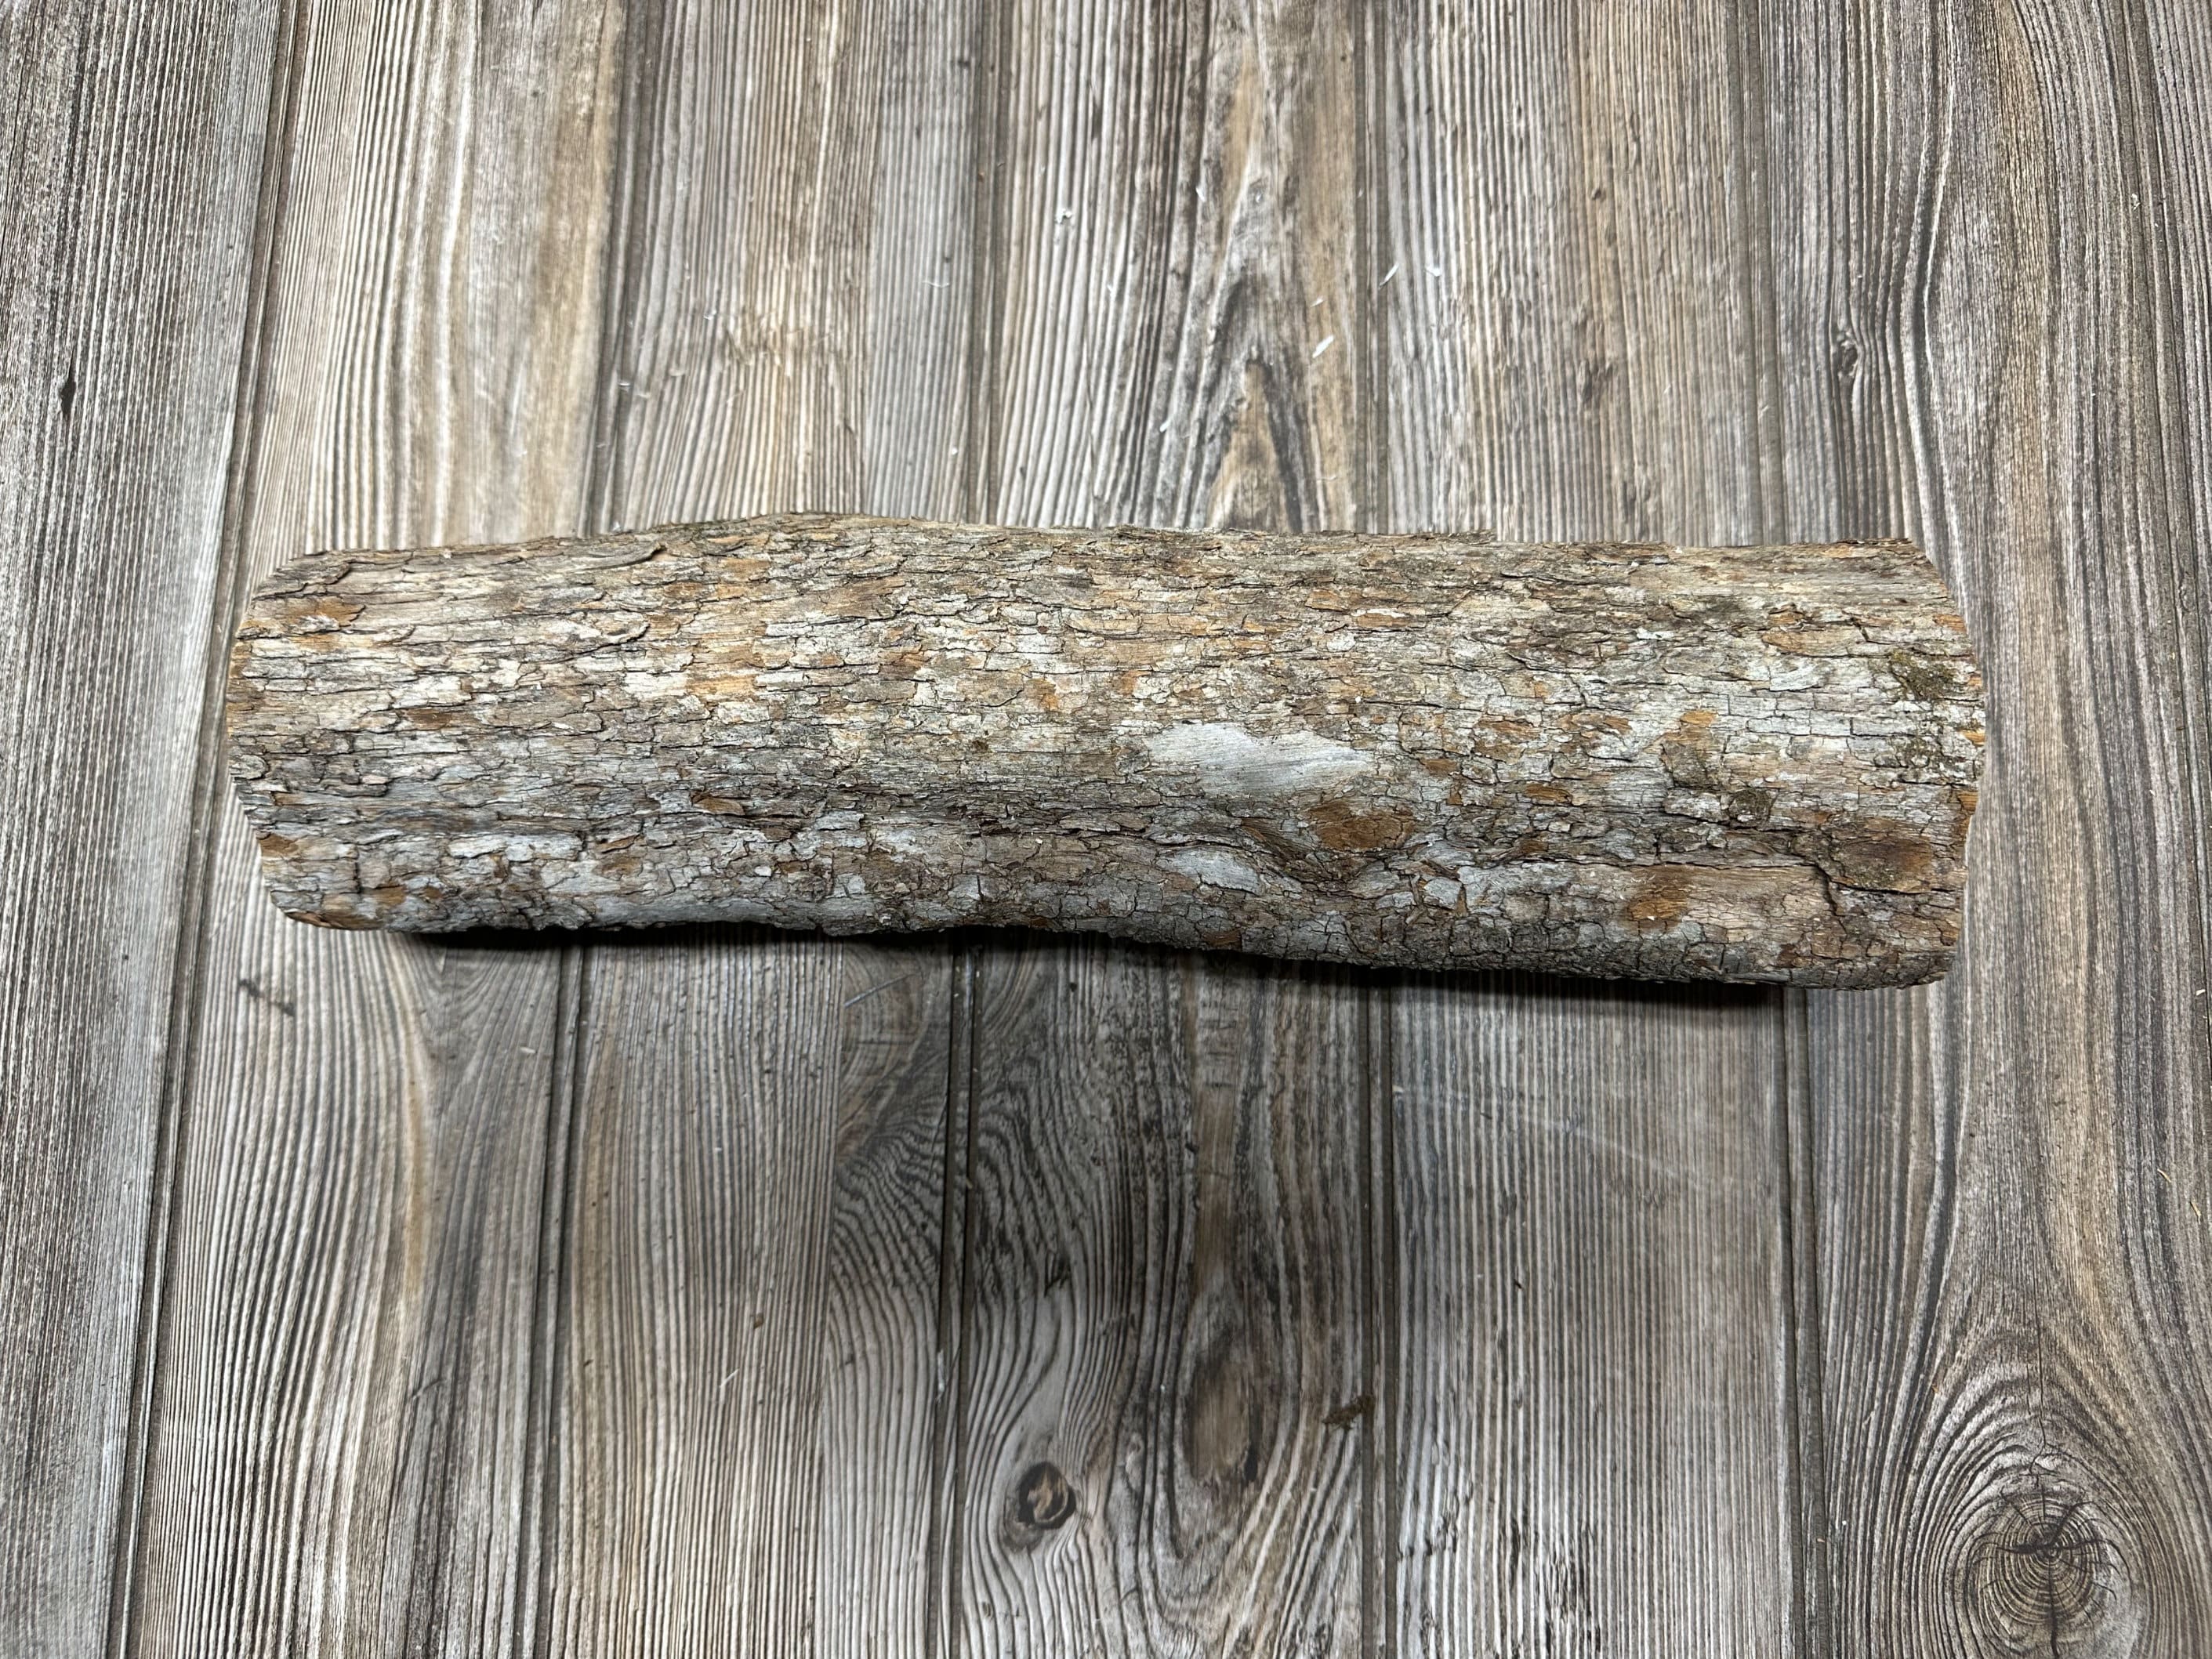 Unique Ironwood Log With Dark Center, Hophornbeam, Approximately 14.5 Inches Long by 4 Inches Wide and 3 Inches Thick